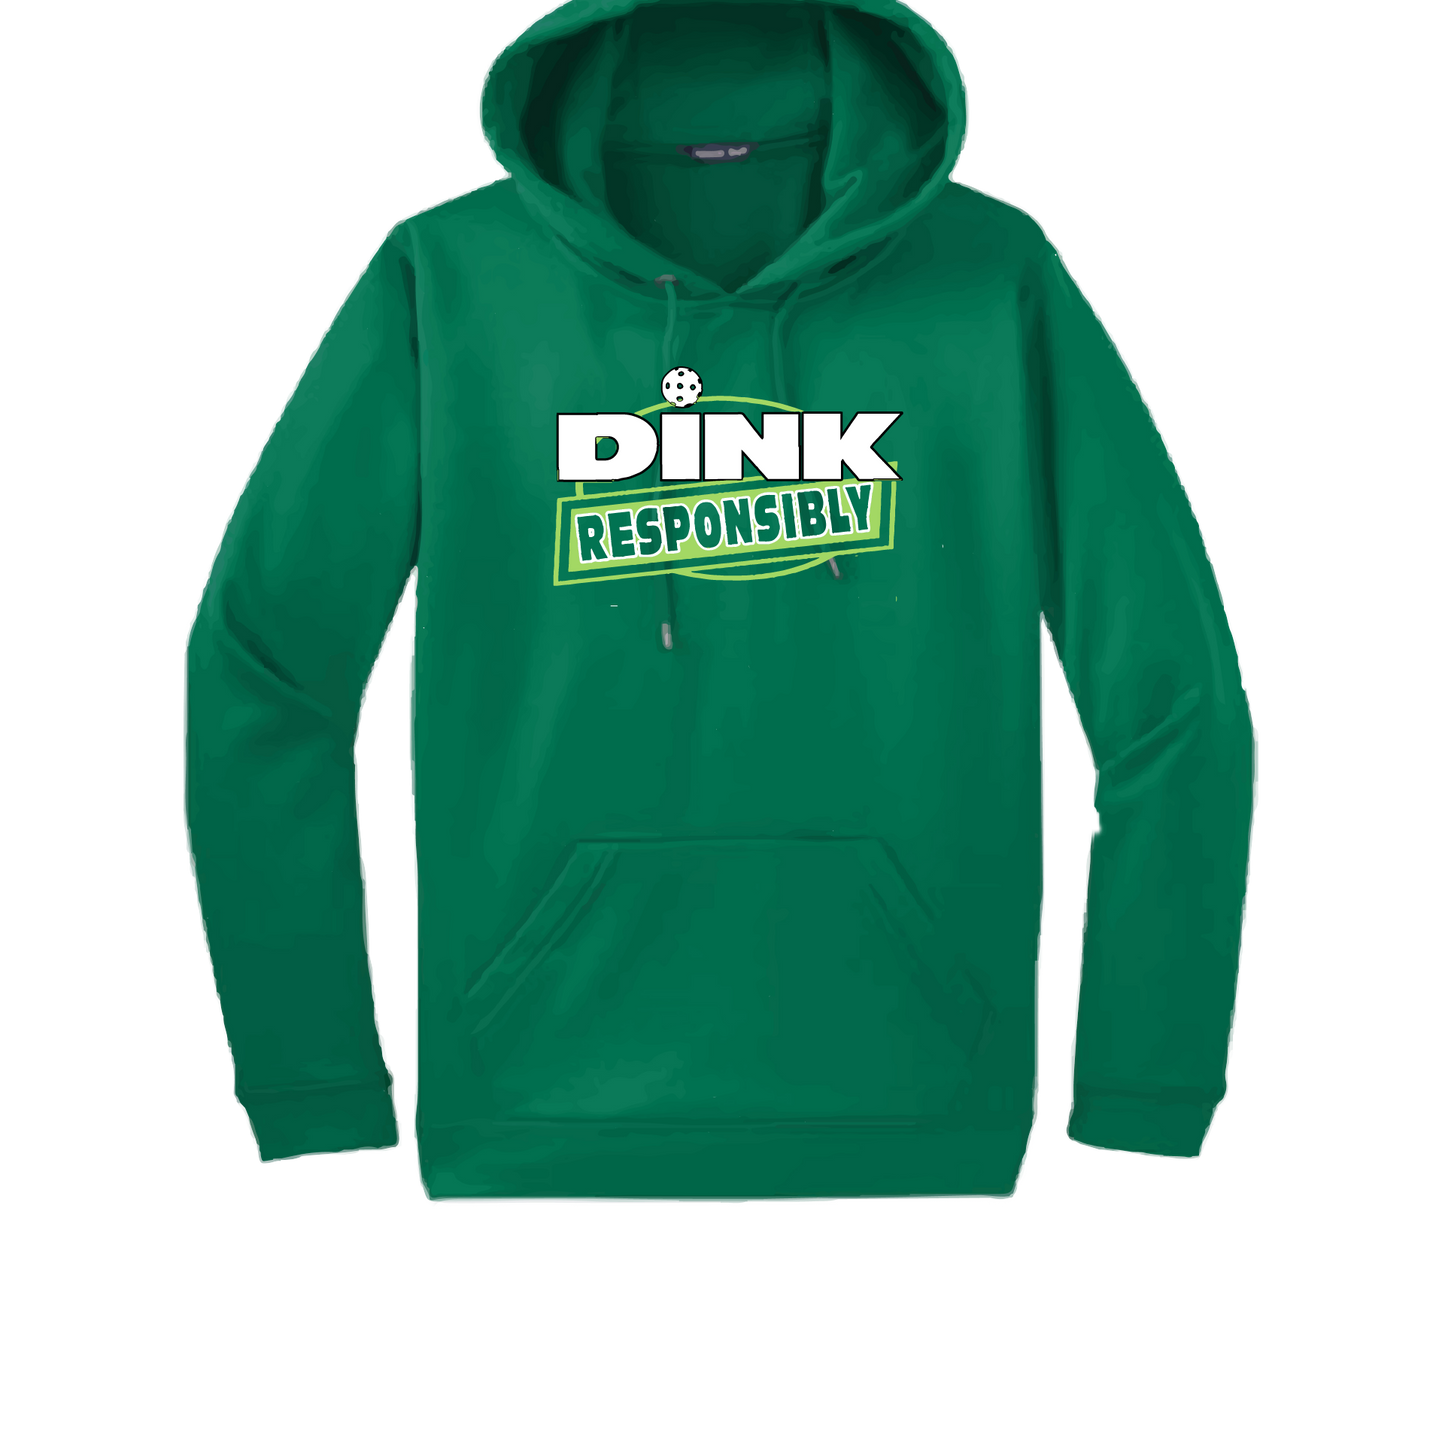 Pickleball Design: Dink Responsibly  Unisex Hooded Sweatshirt: Moisture-wicking, double-lined hood, front pouch pocket.  This unisex hooded sweatshirt is ultra comfortable and soft. Stay warm on the Pickleball courts while being that hit with this one of kind design.